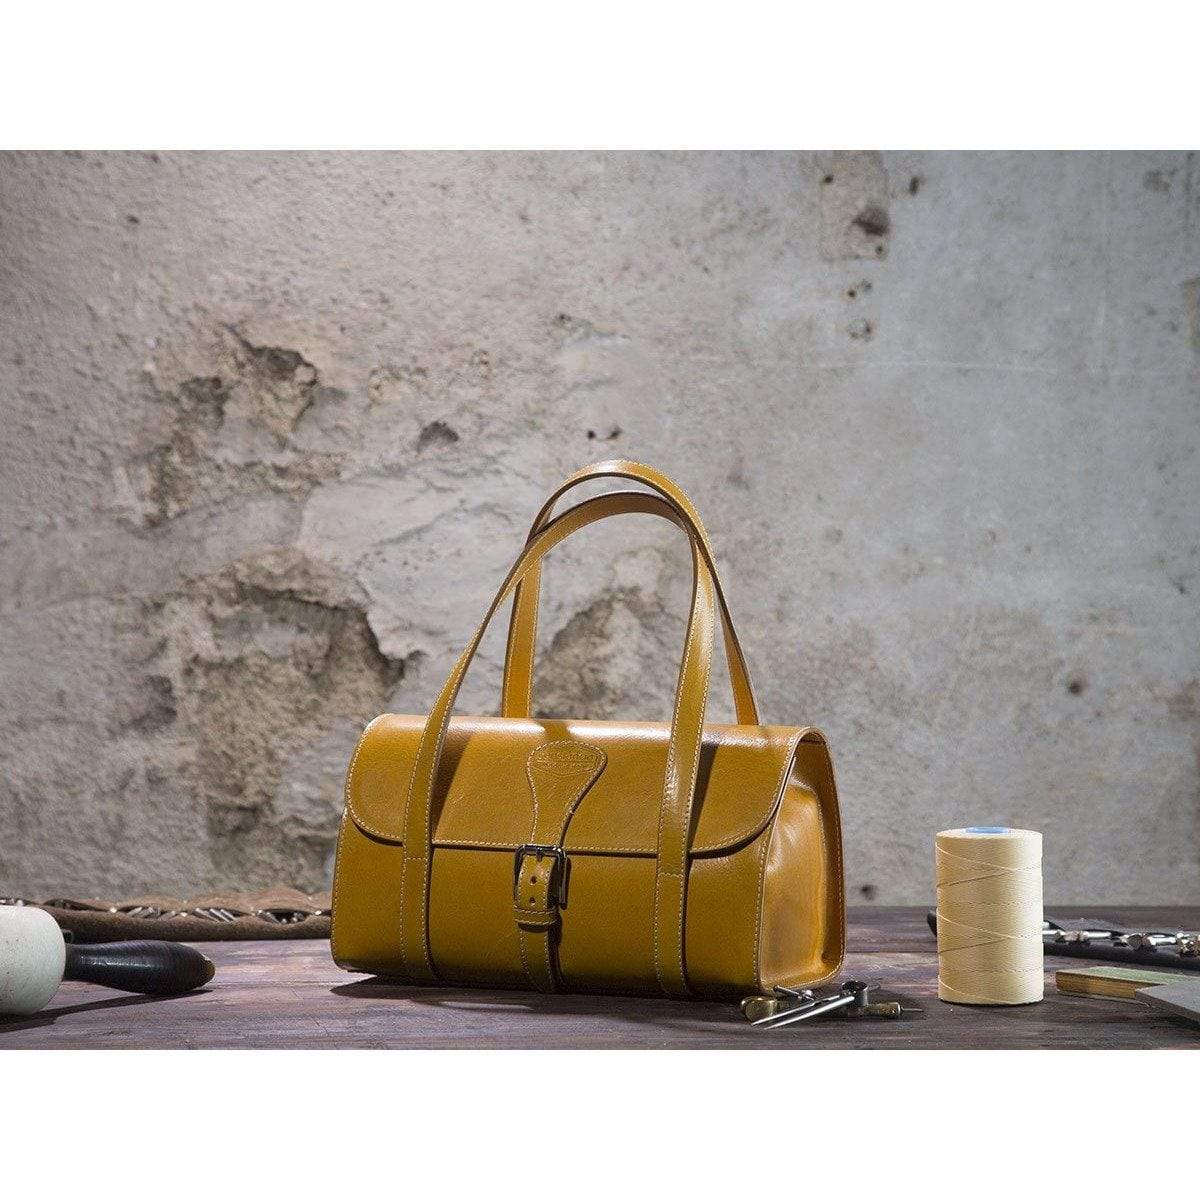 Constancia Made in Italy Women Handbags Shopping and Tote Bag